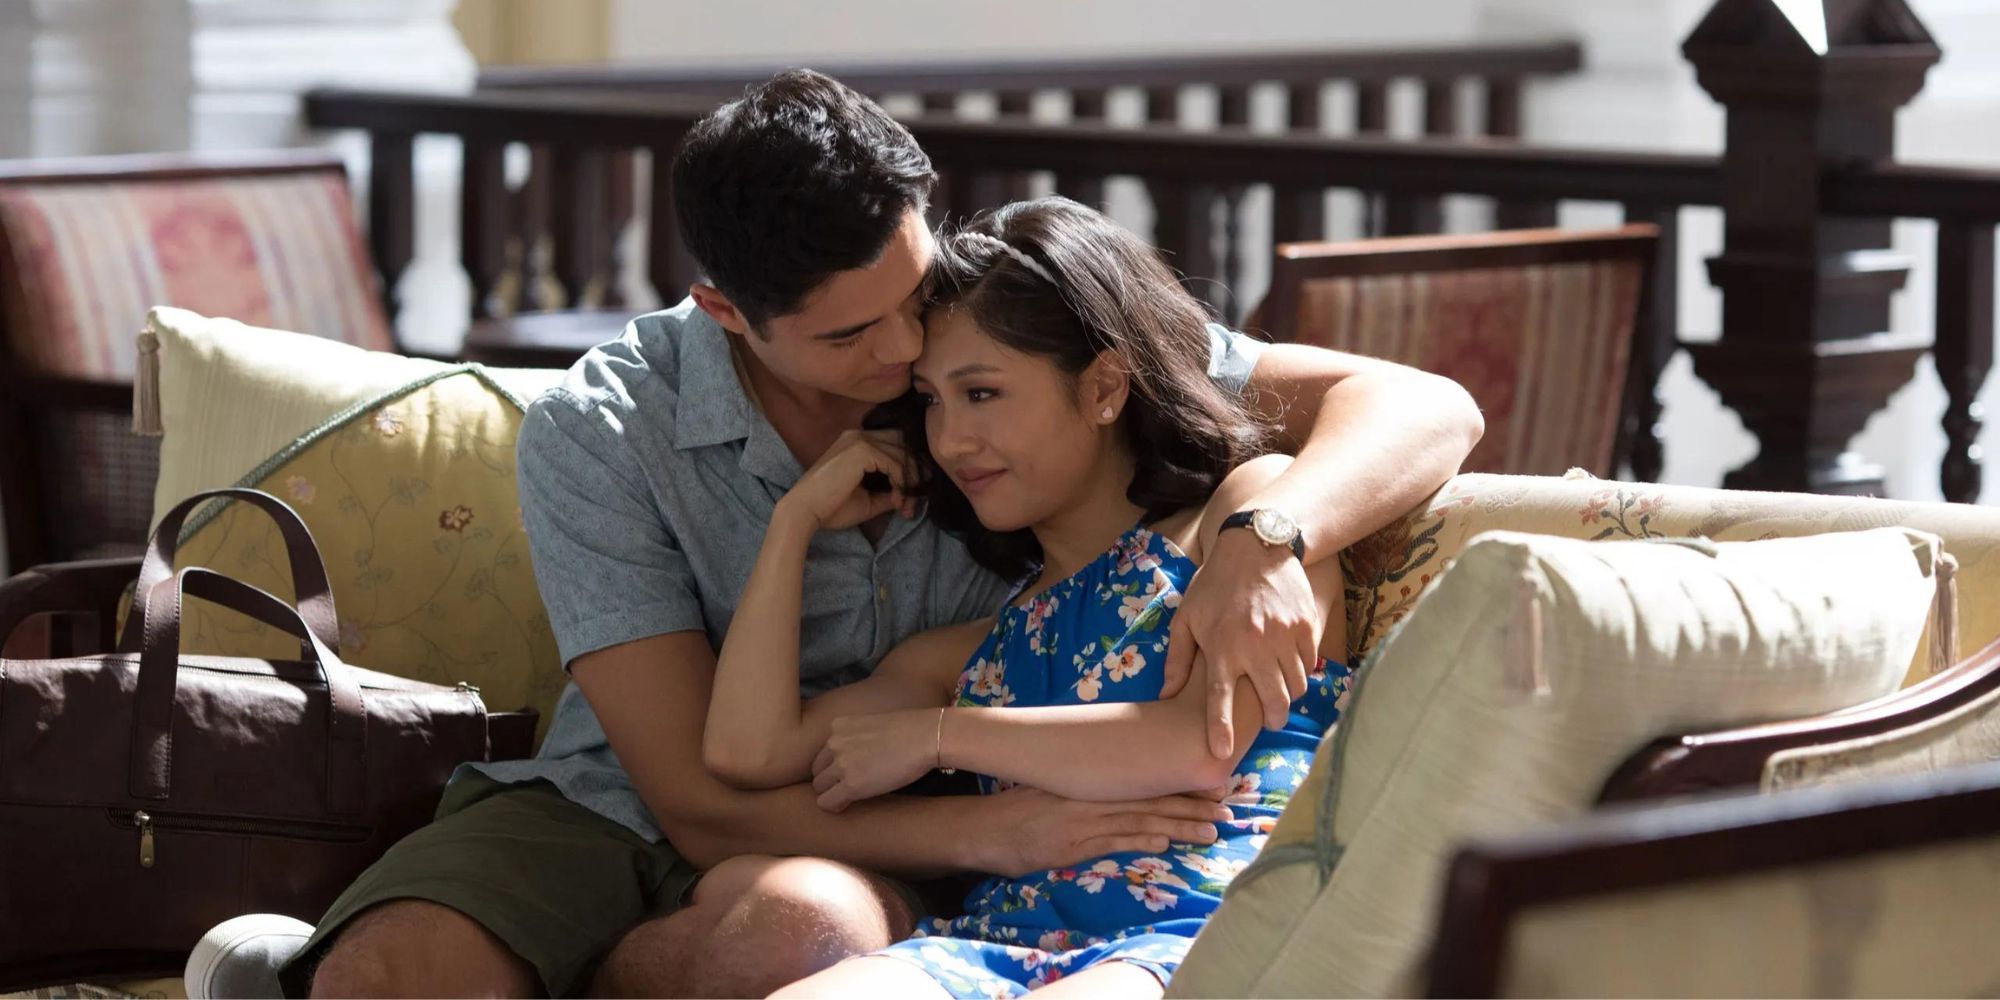 Nick and Rachel from Crazy Rich Asians cuddling on a couch